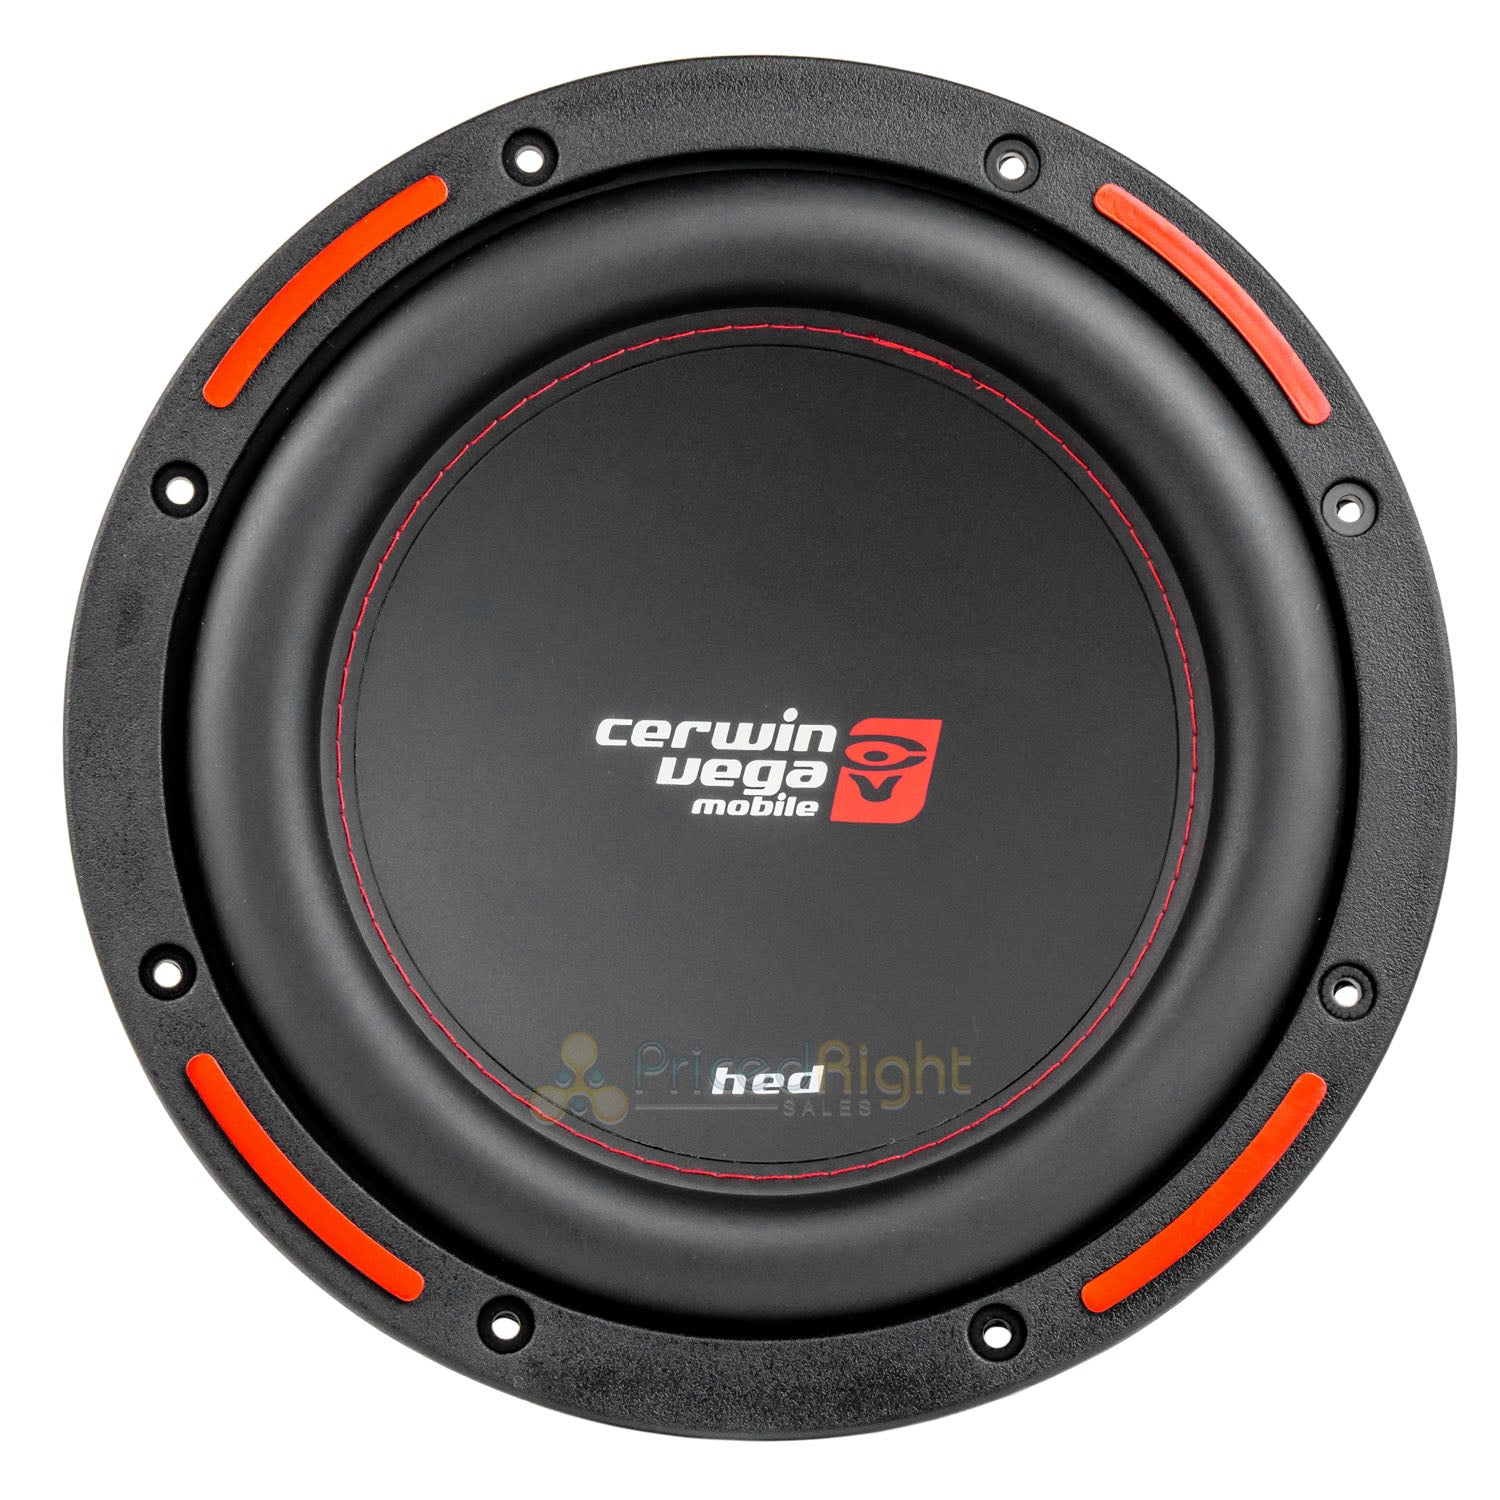 2 Pack Cerwin Vega 10" Subwoofer 4 Ohm 1000W Max Power SVC HED Series CER-H7104S